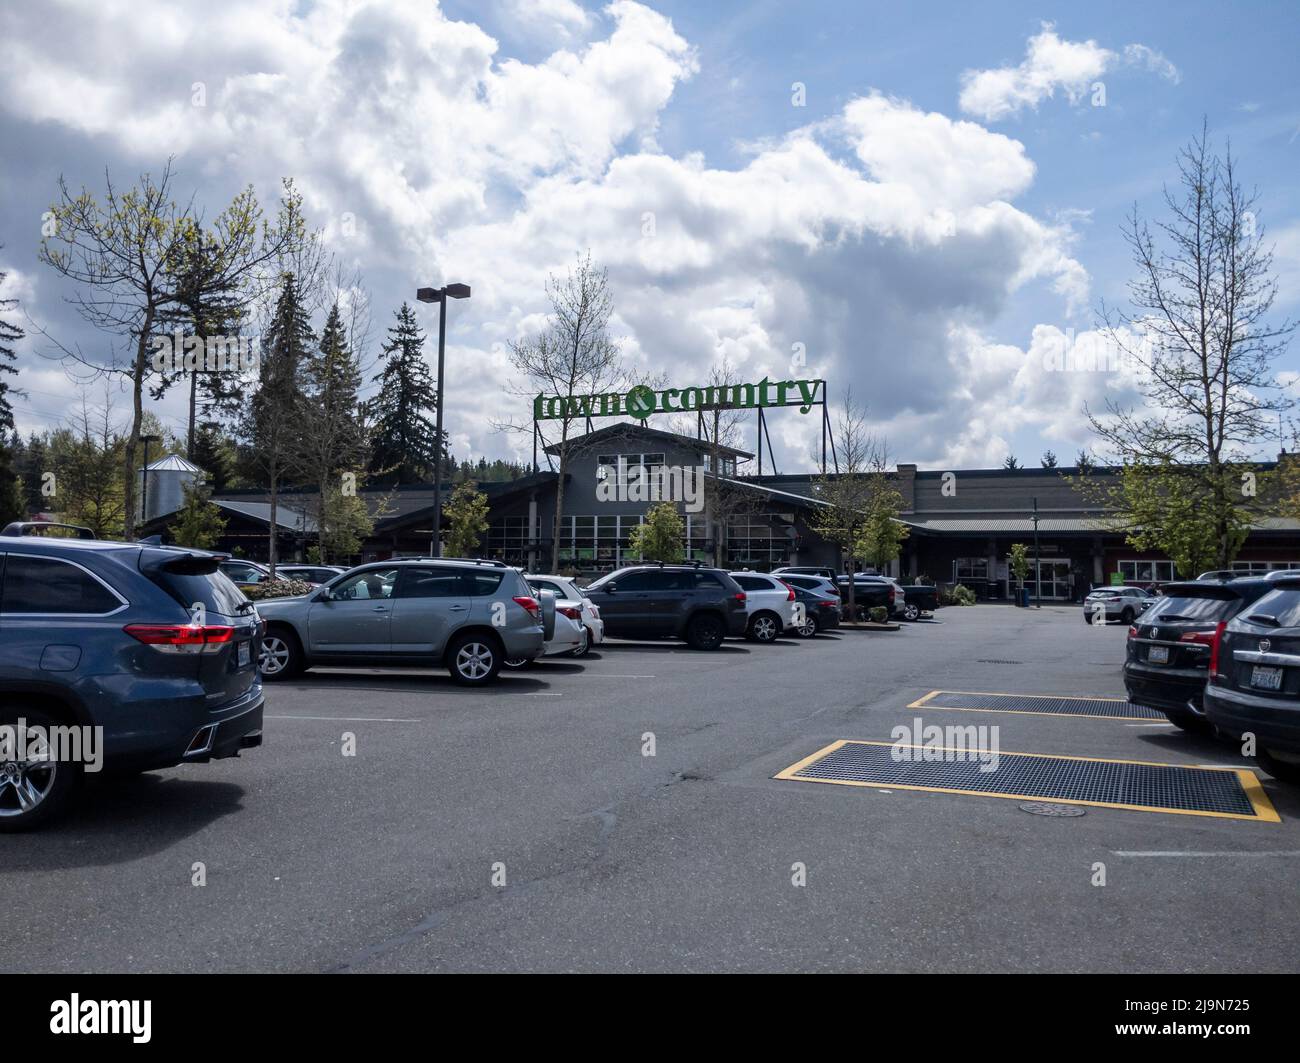 Mill Creek, WA USA - circa May 2022: Exterior view of a Town and Country grocery store on a sunny, cloudy day Stock Photo